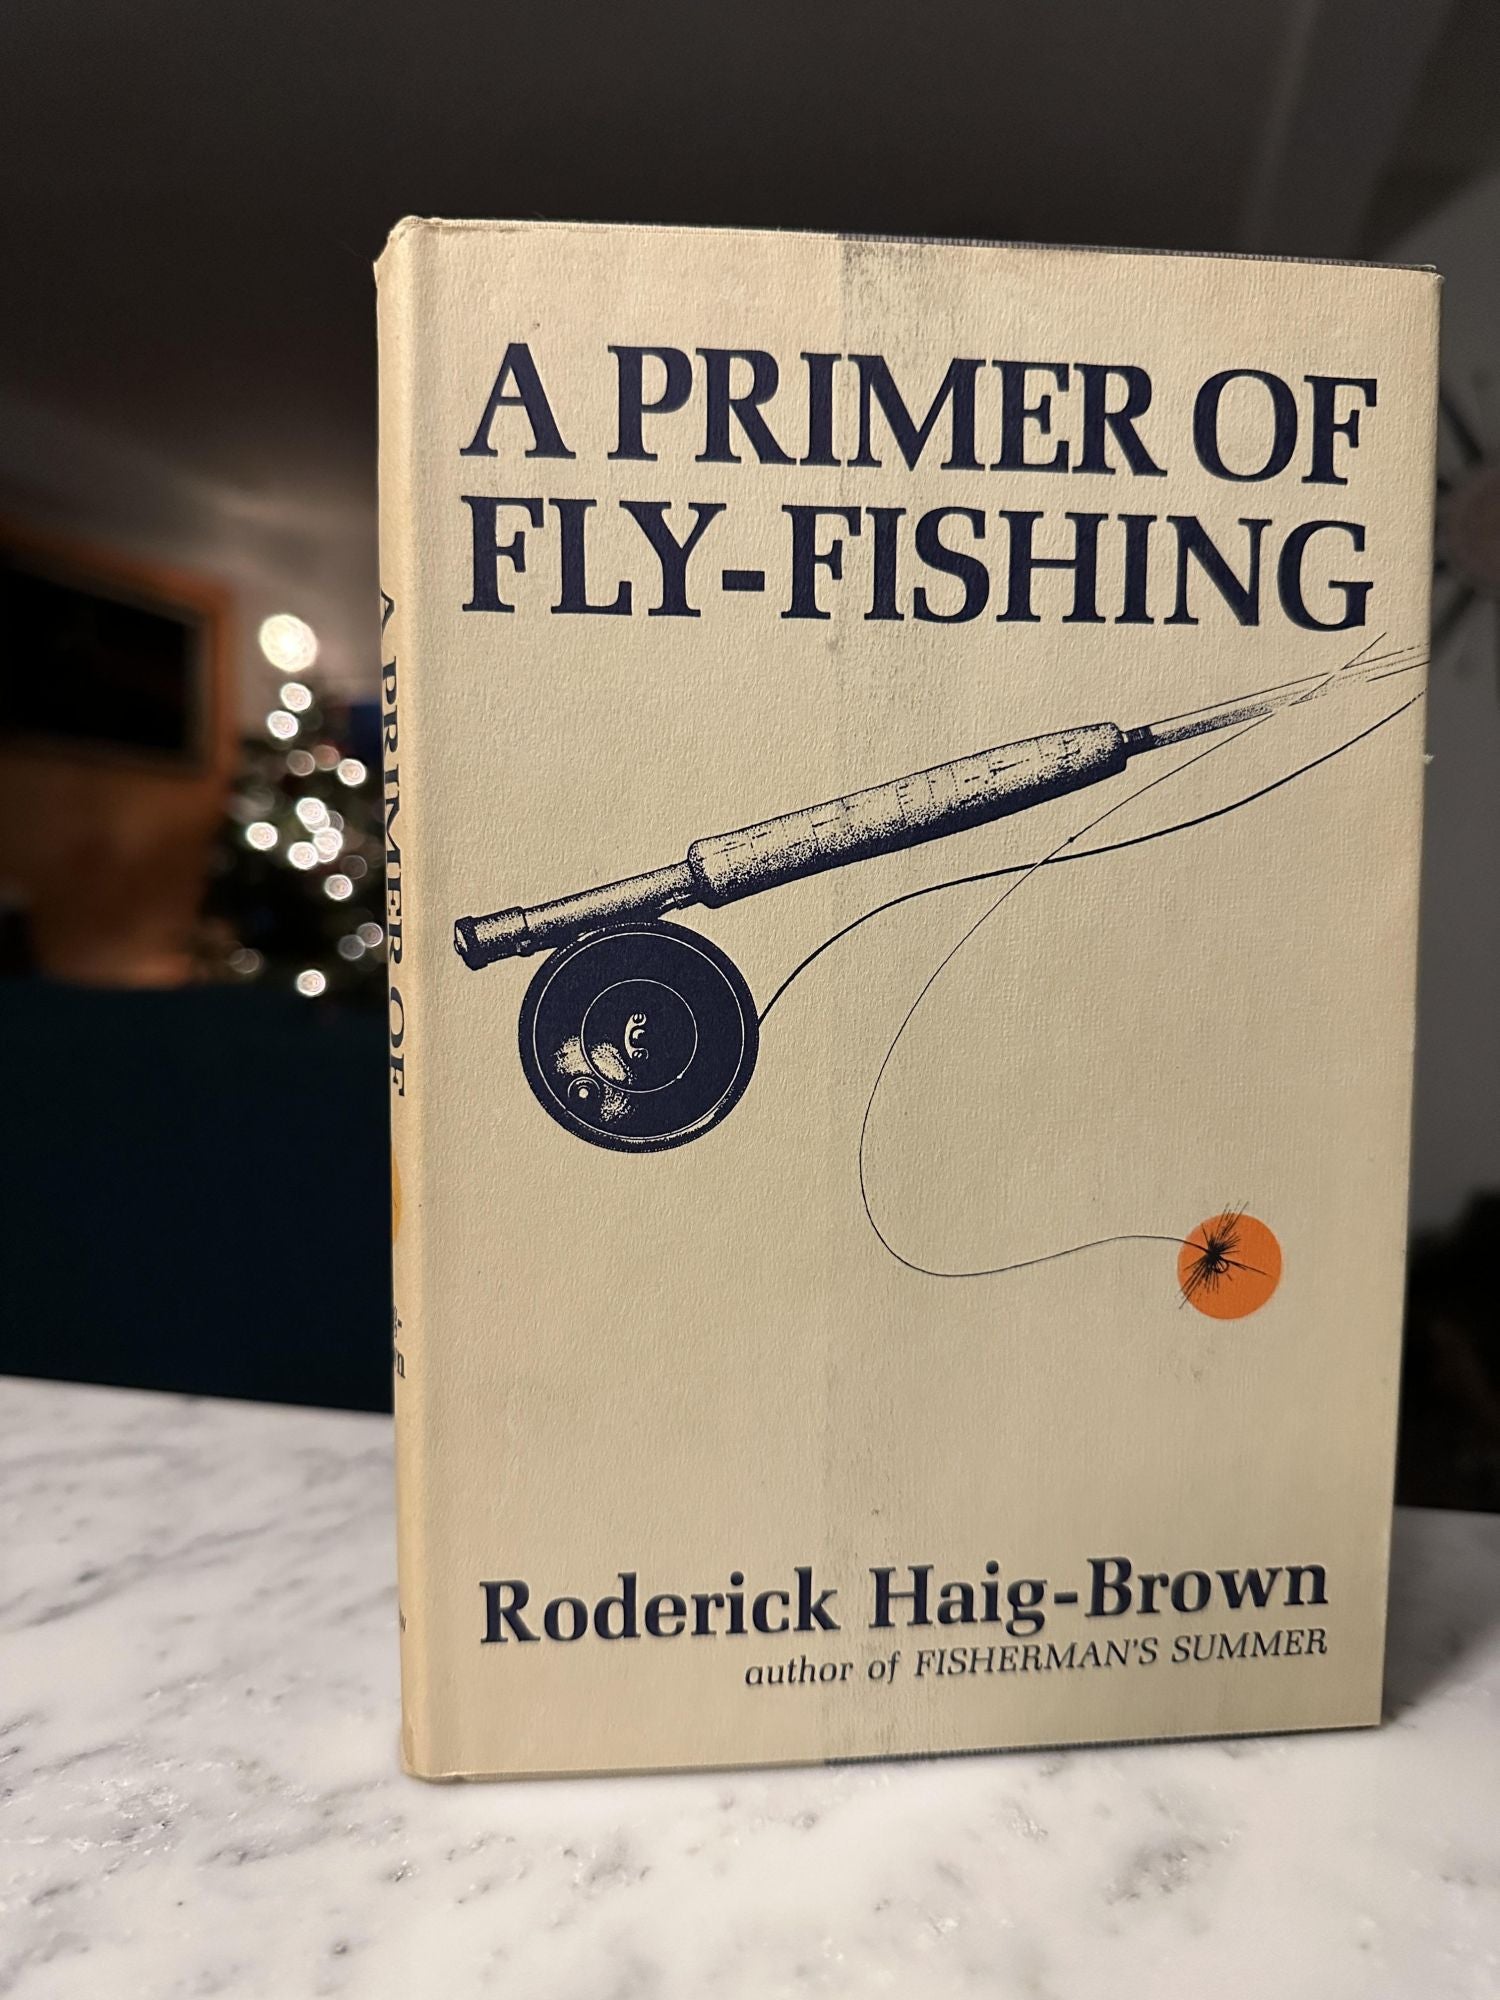 A Primer of Fly-Fishing. Roderick Haig-Brown.